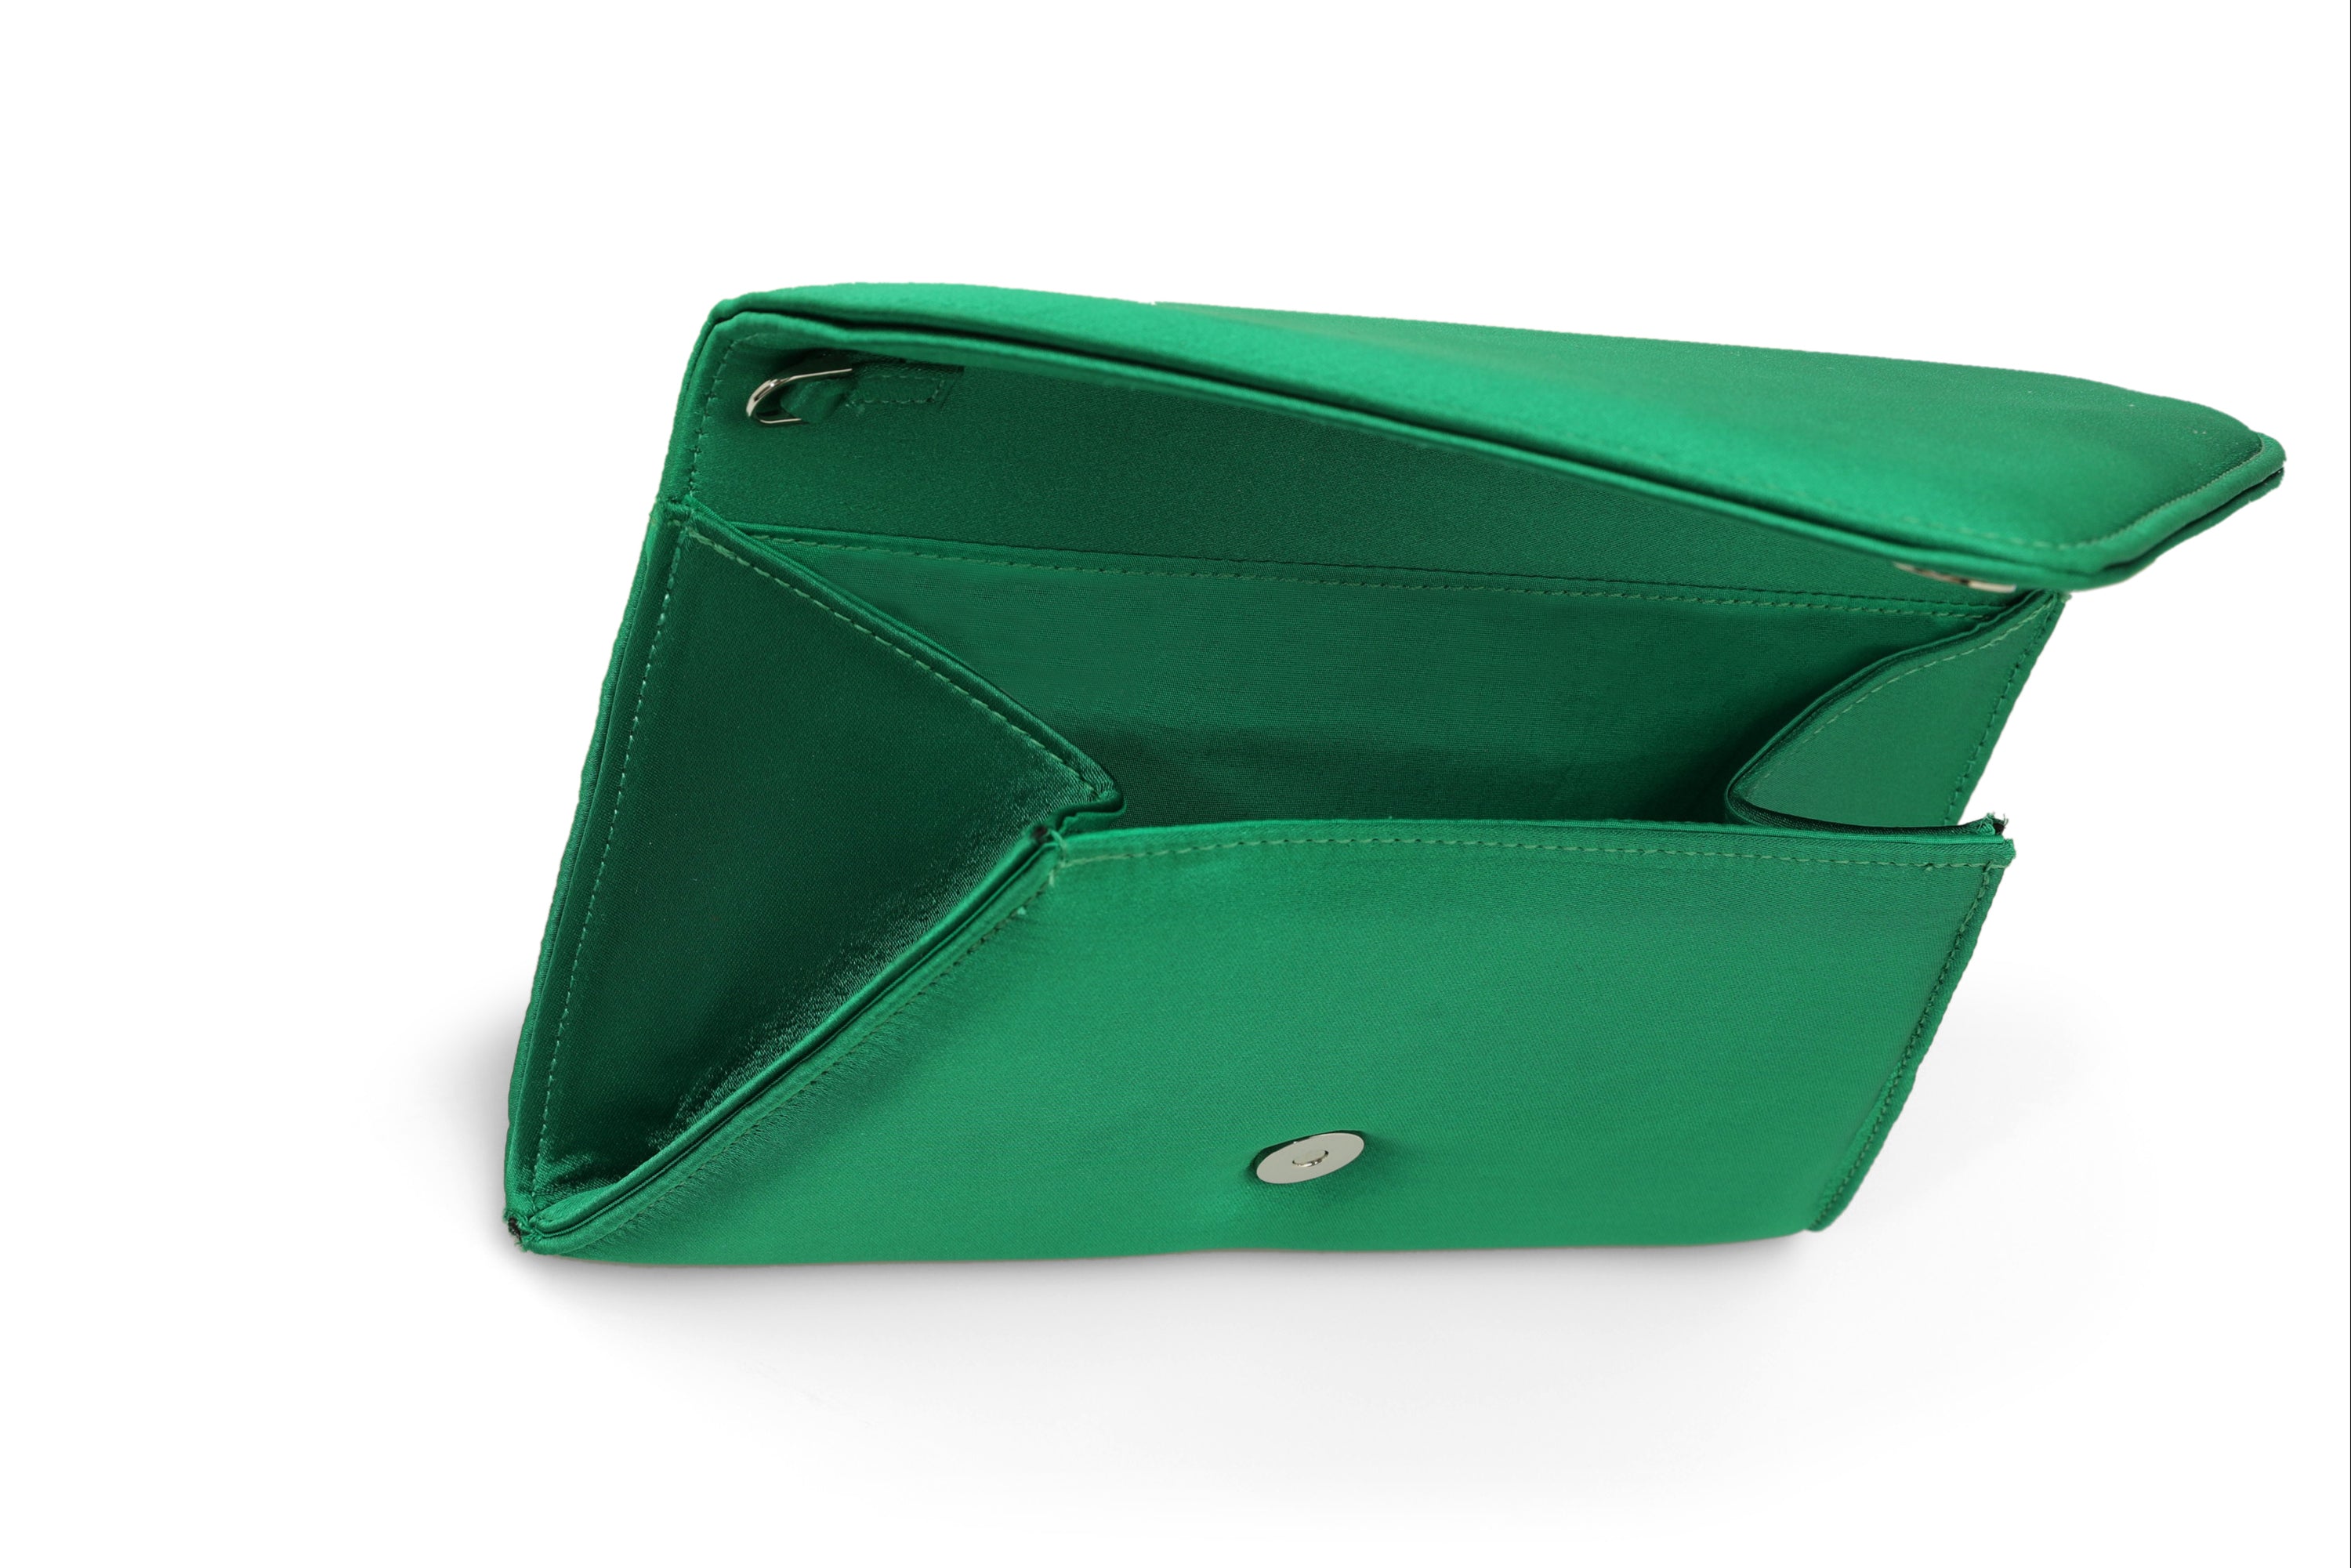 Recycled Satin Clutch Bag - Green